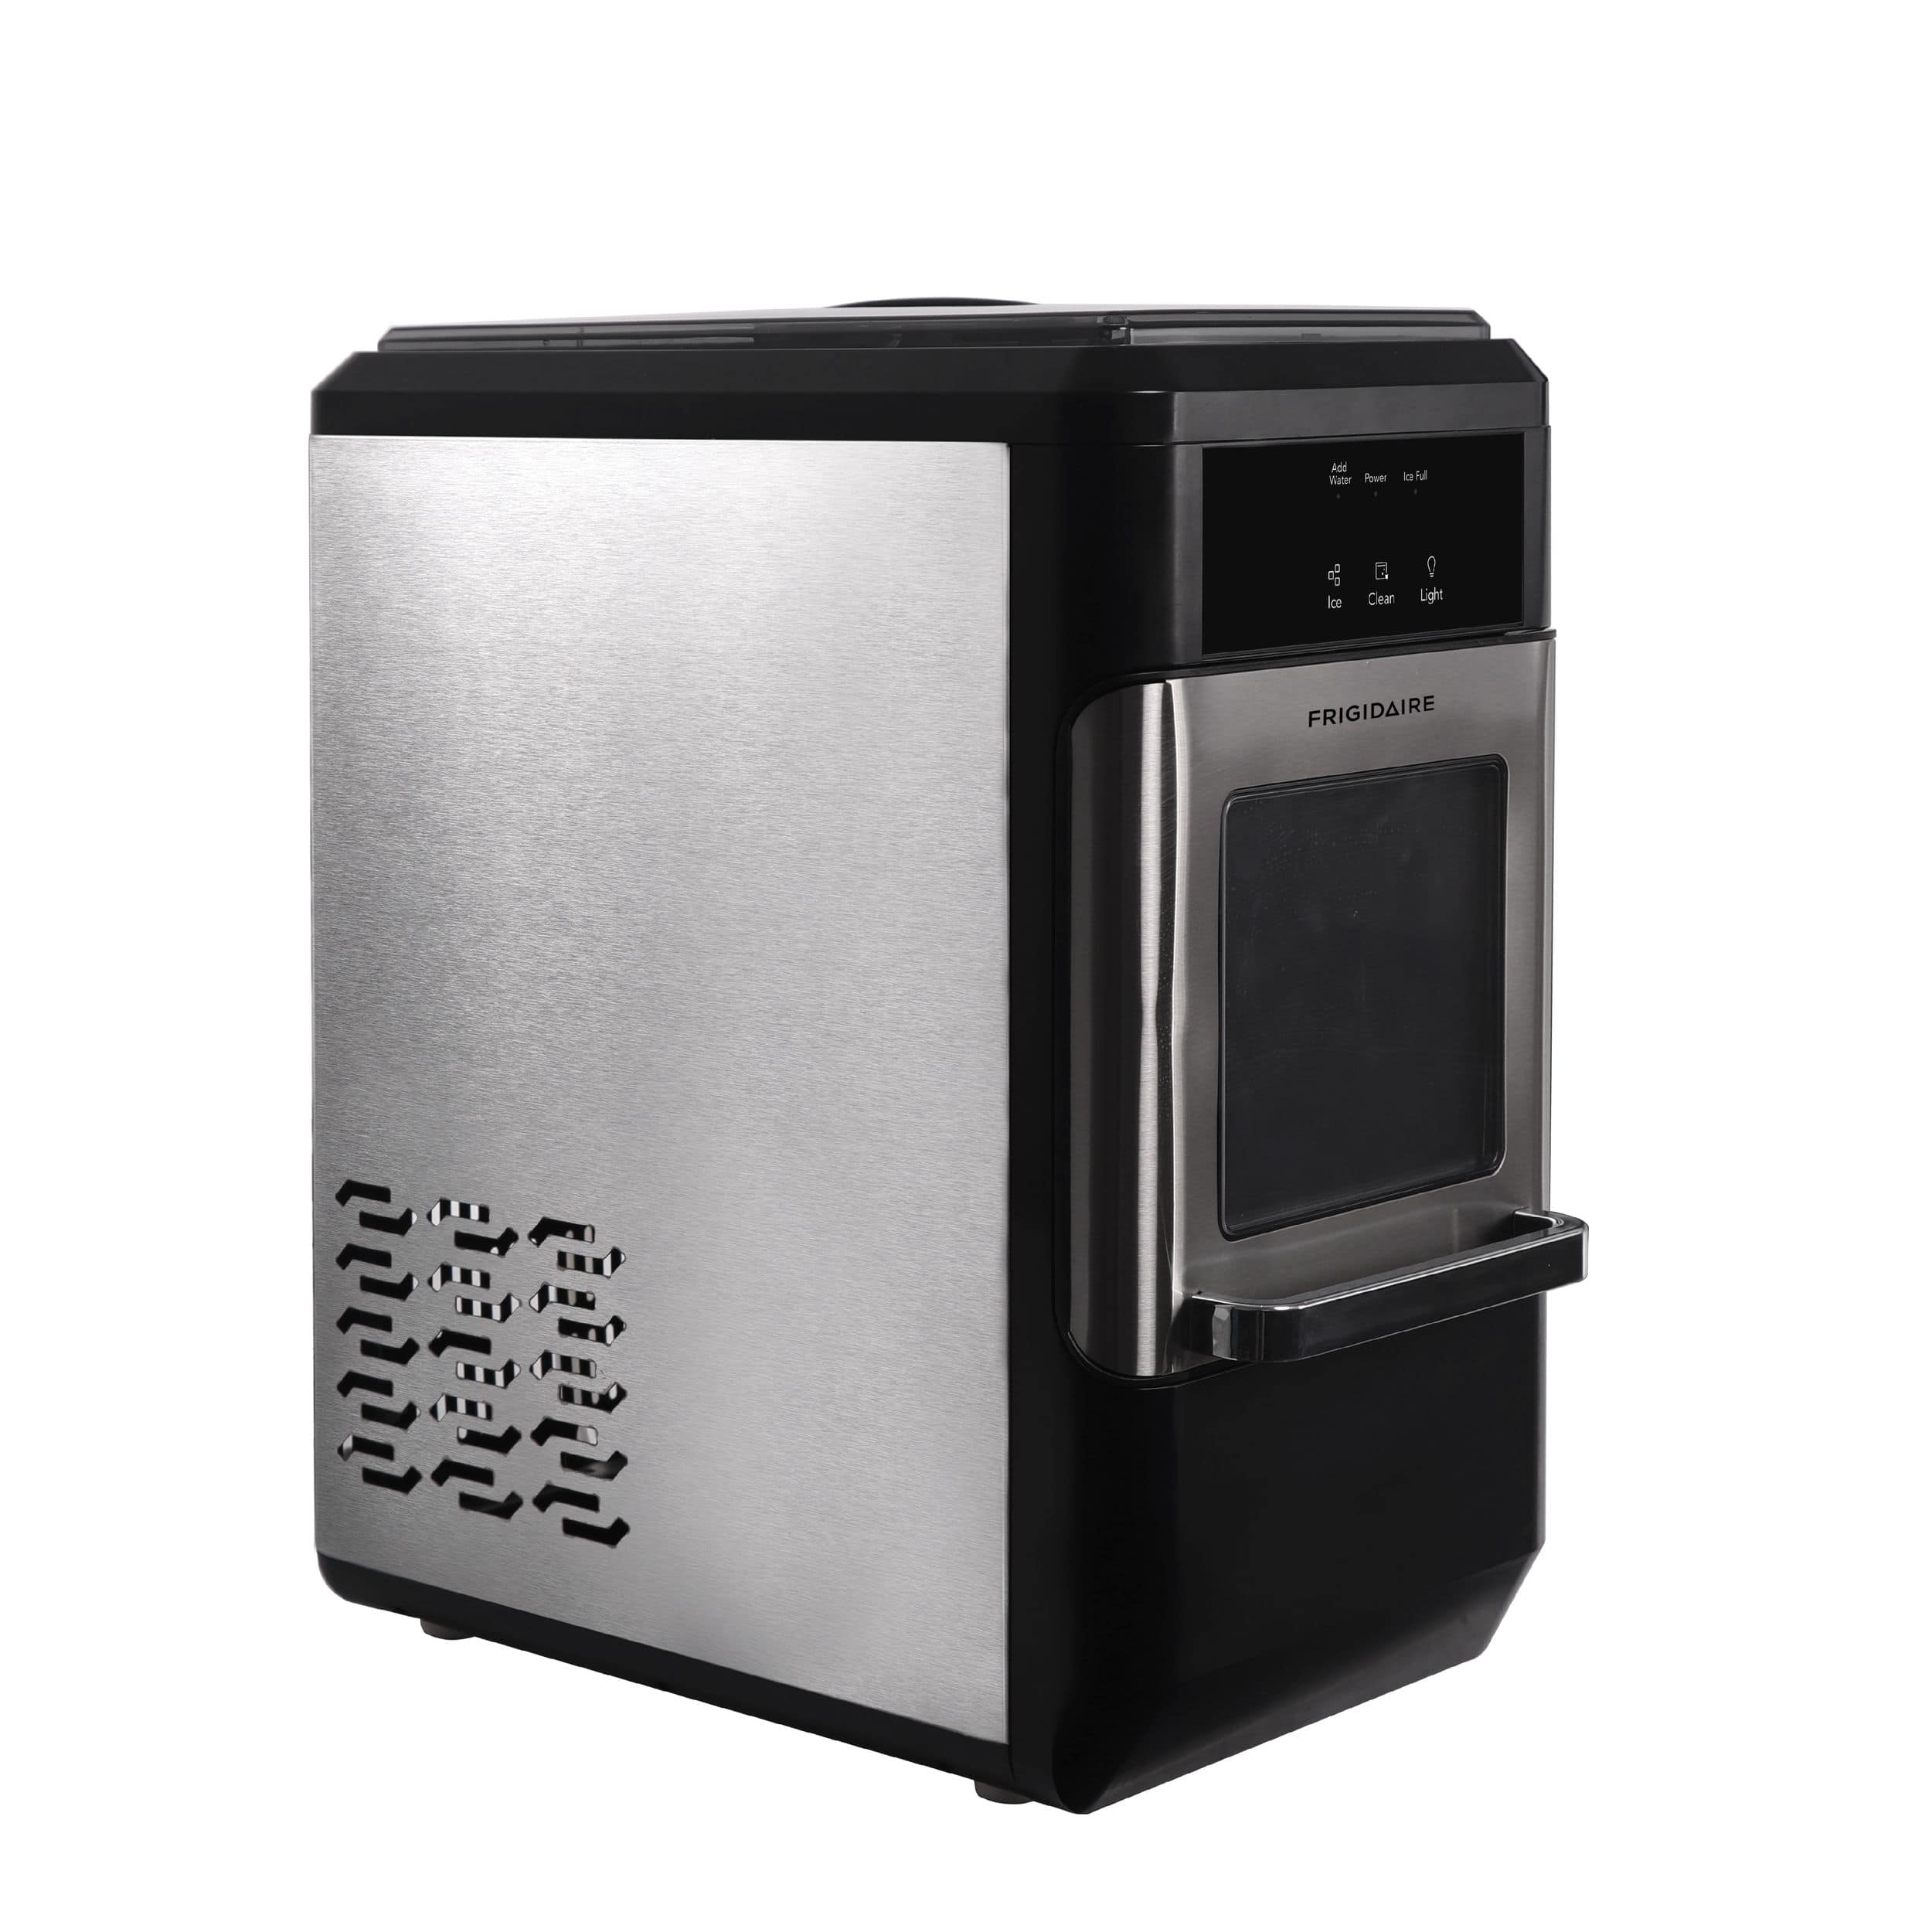 Frigidaire 44lbs Crunchy Chewable Nugget Ice Maker in Stainless Steel – RJP  Unlimited